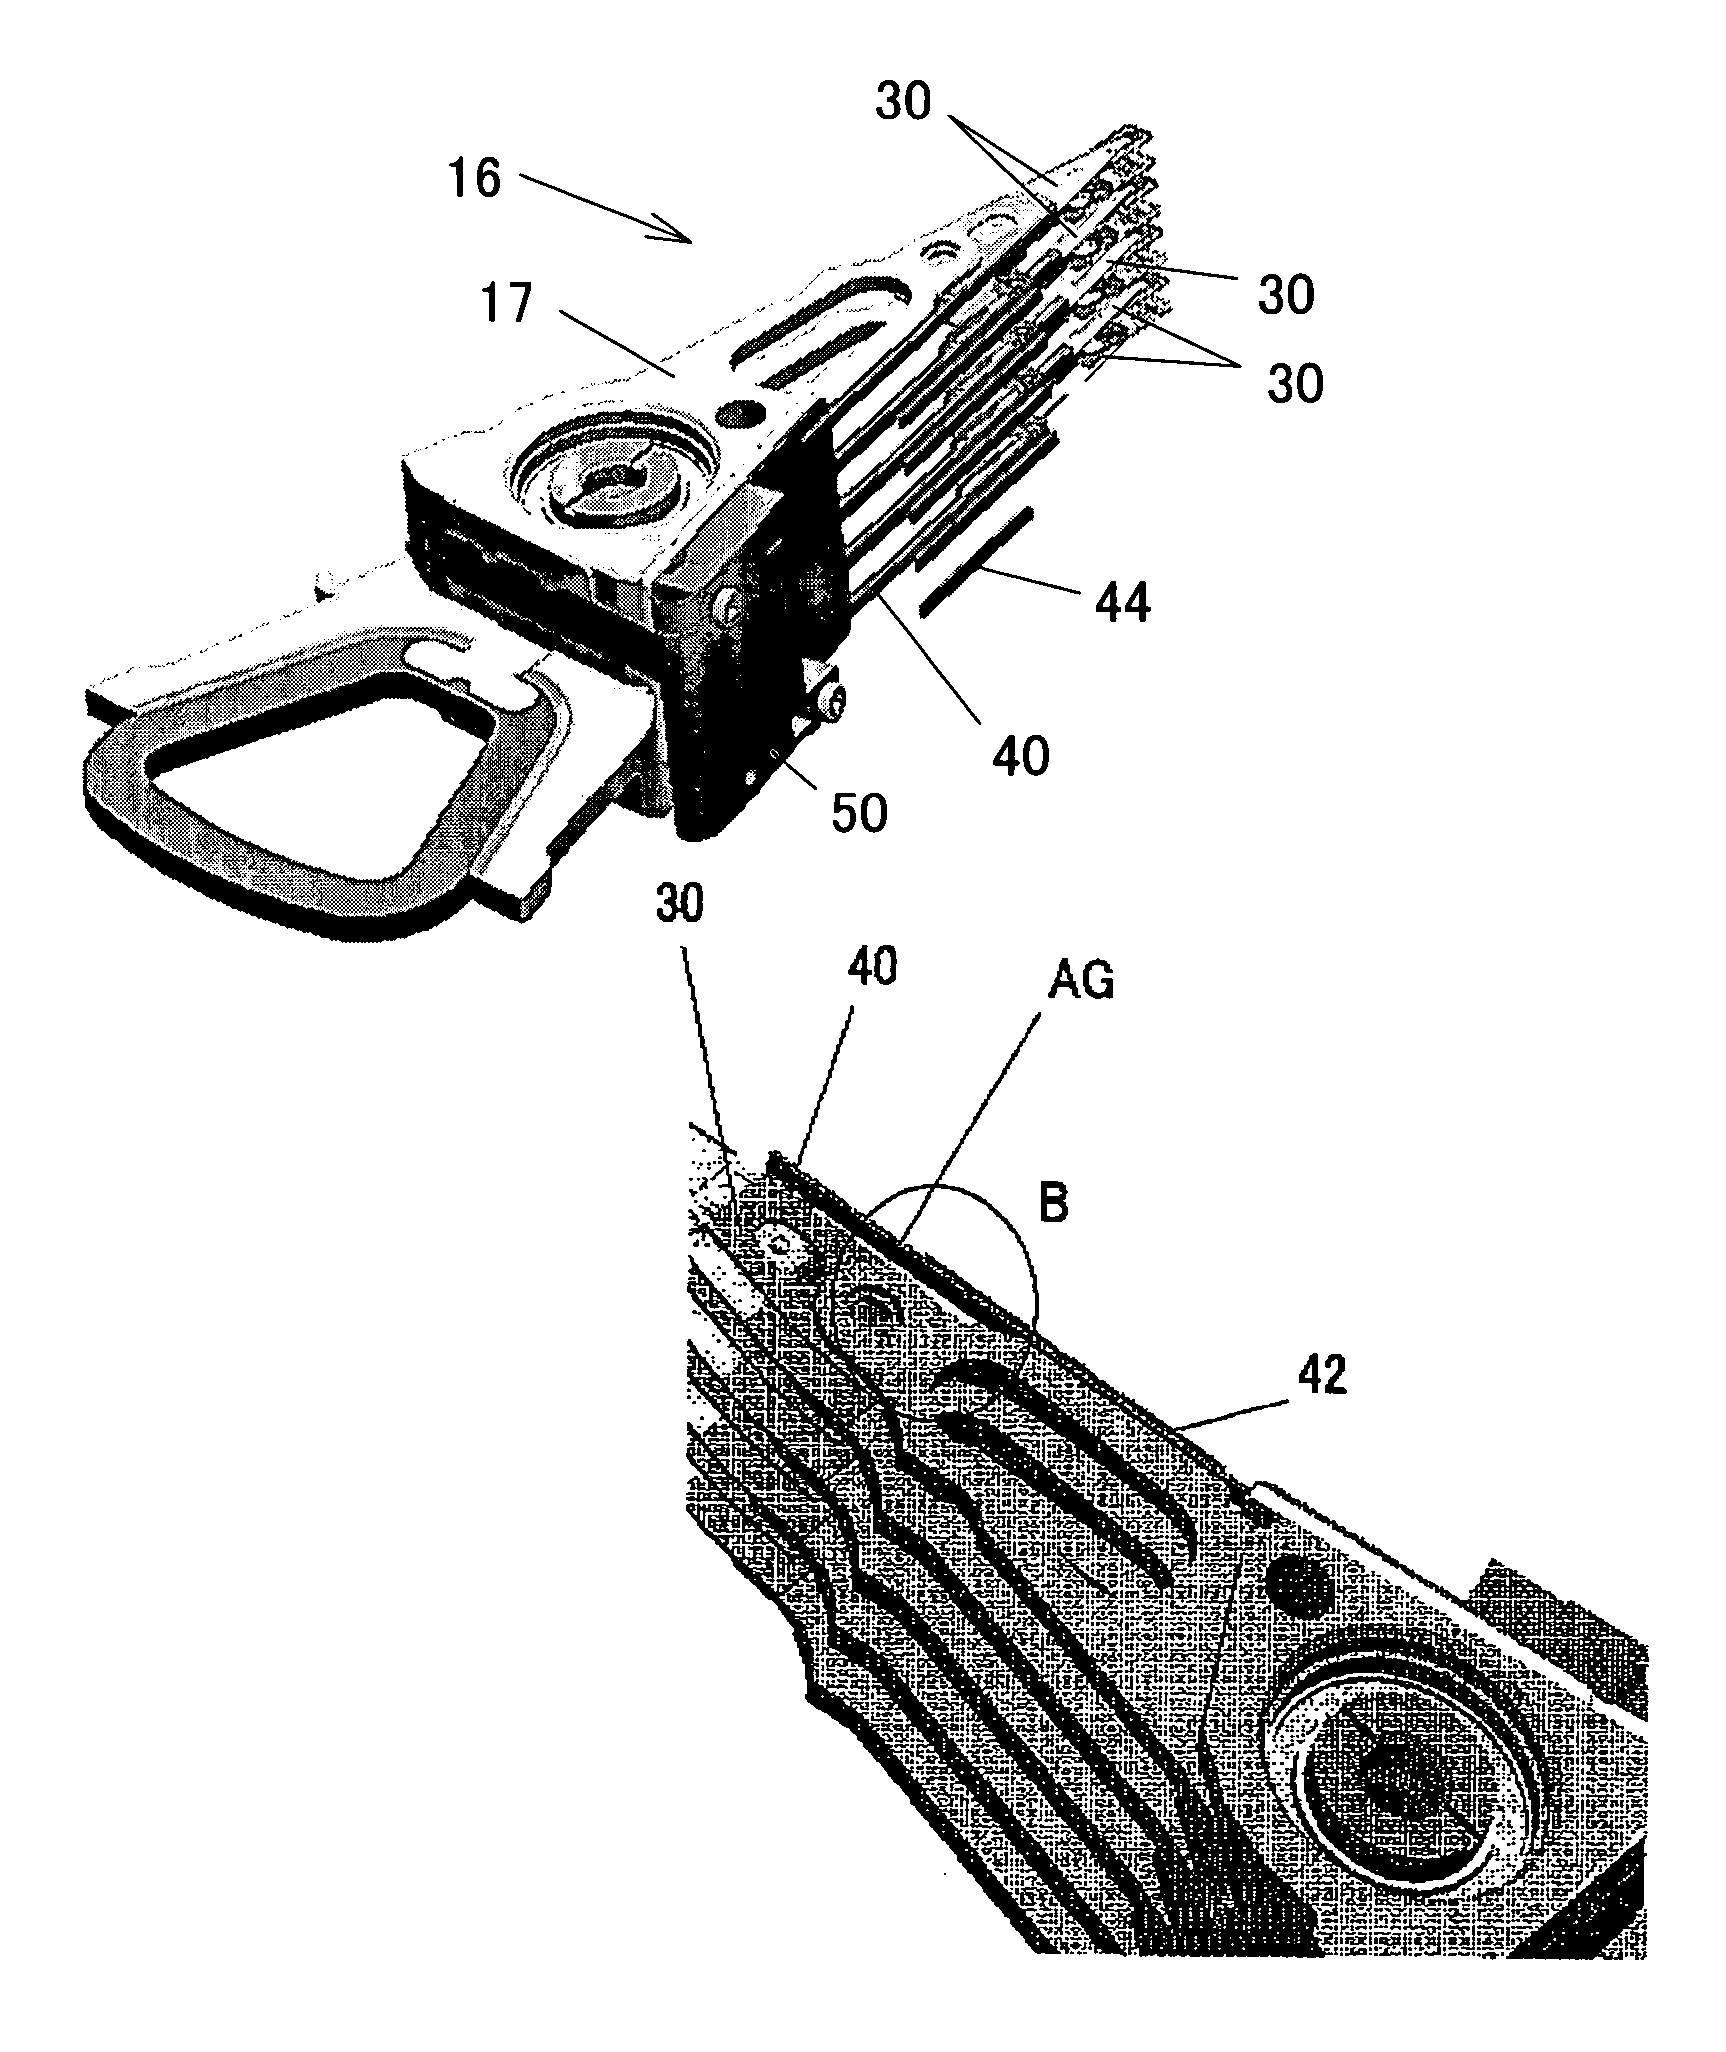 Disc drive actuator assembly with trunk flexible printed circuit board damping configuration